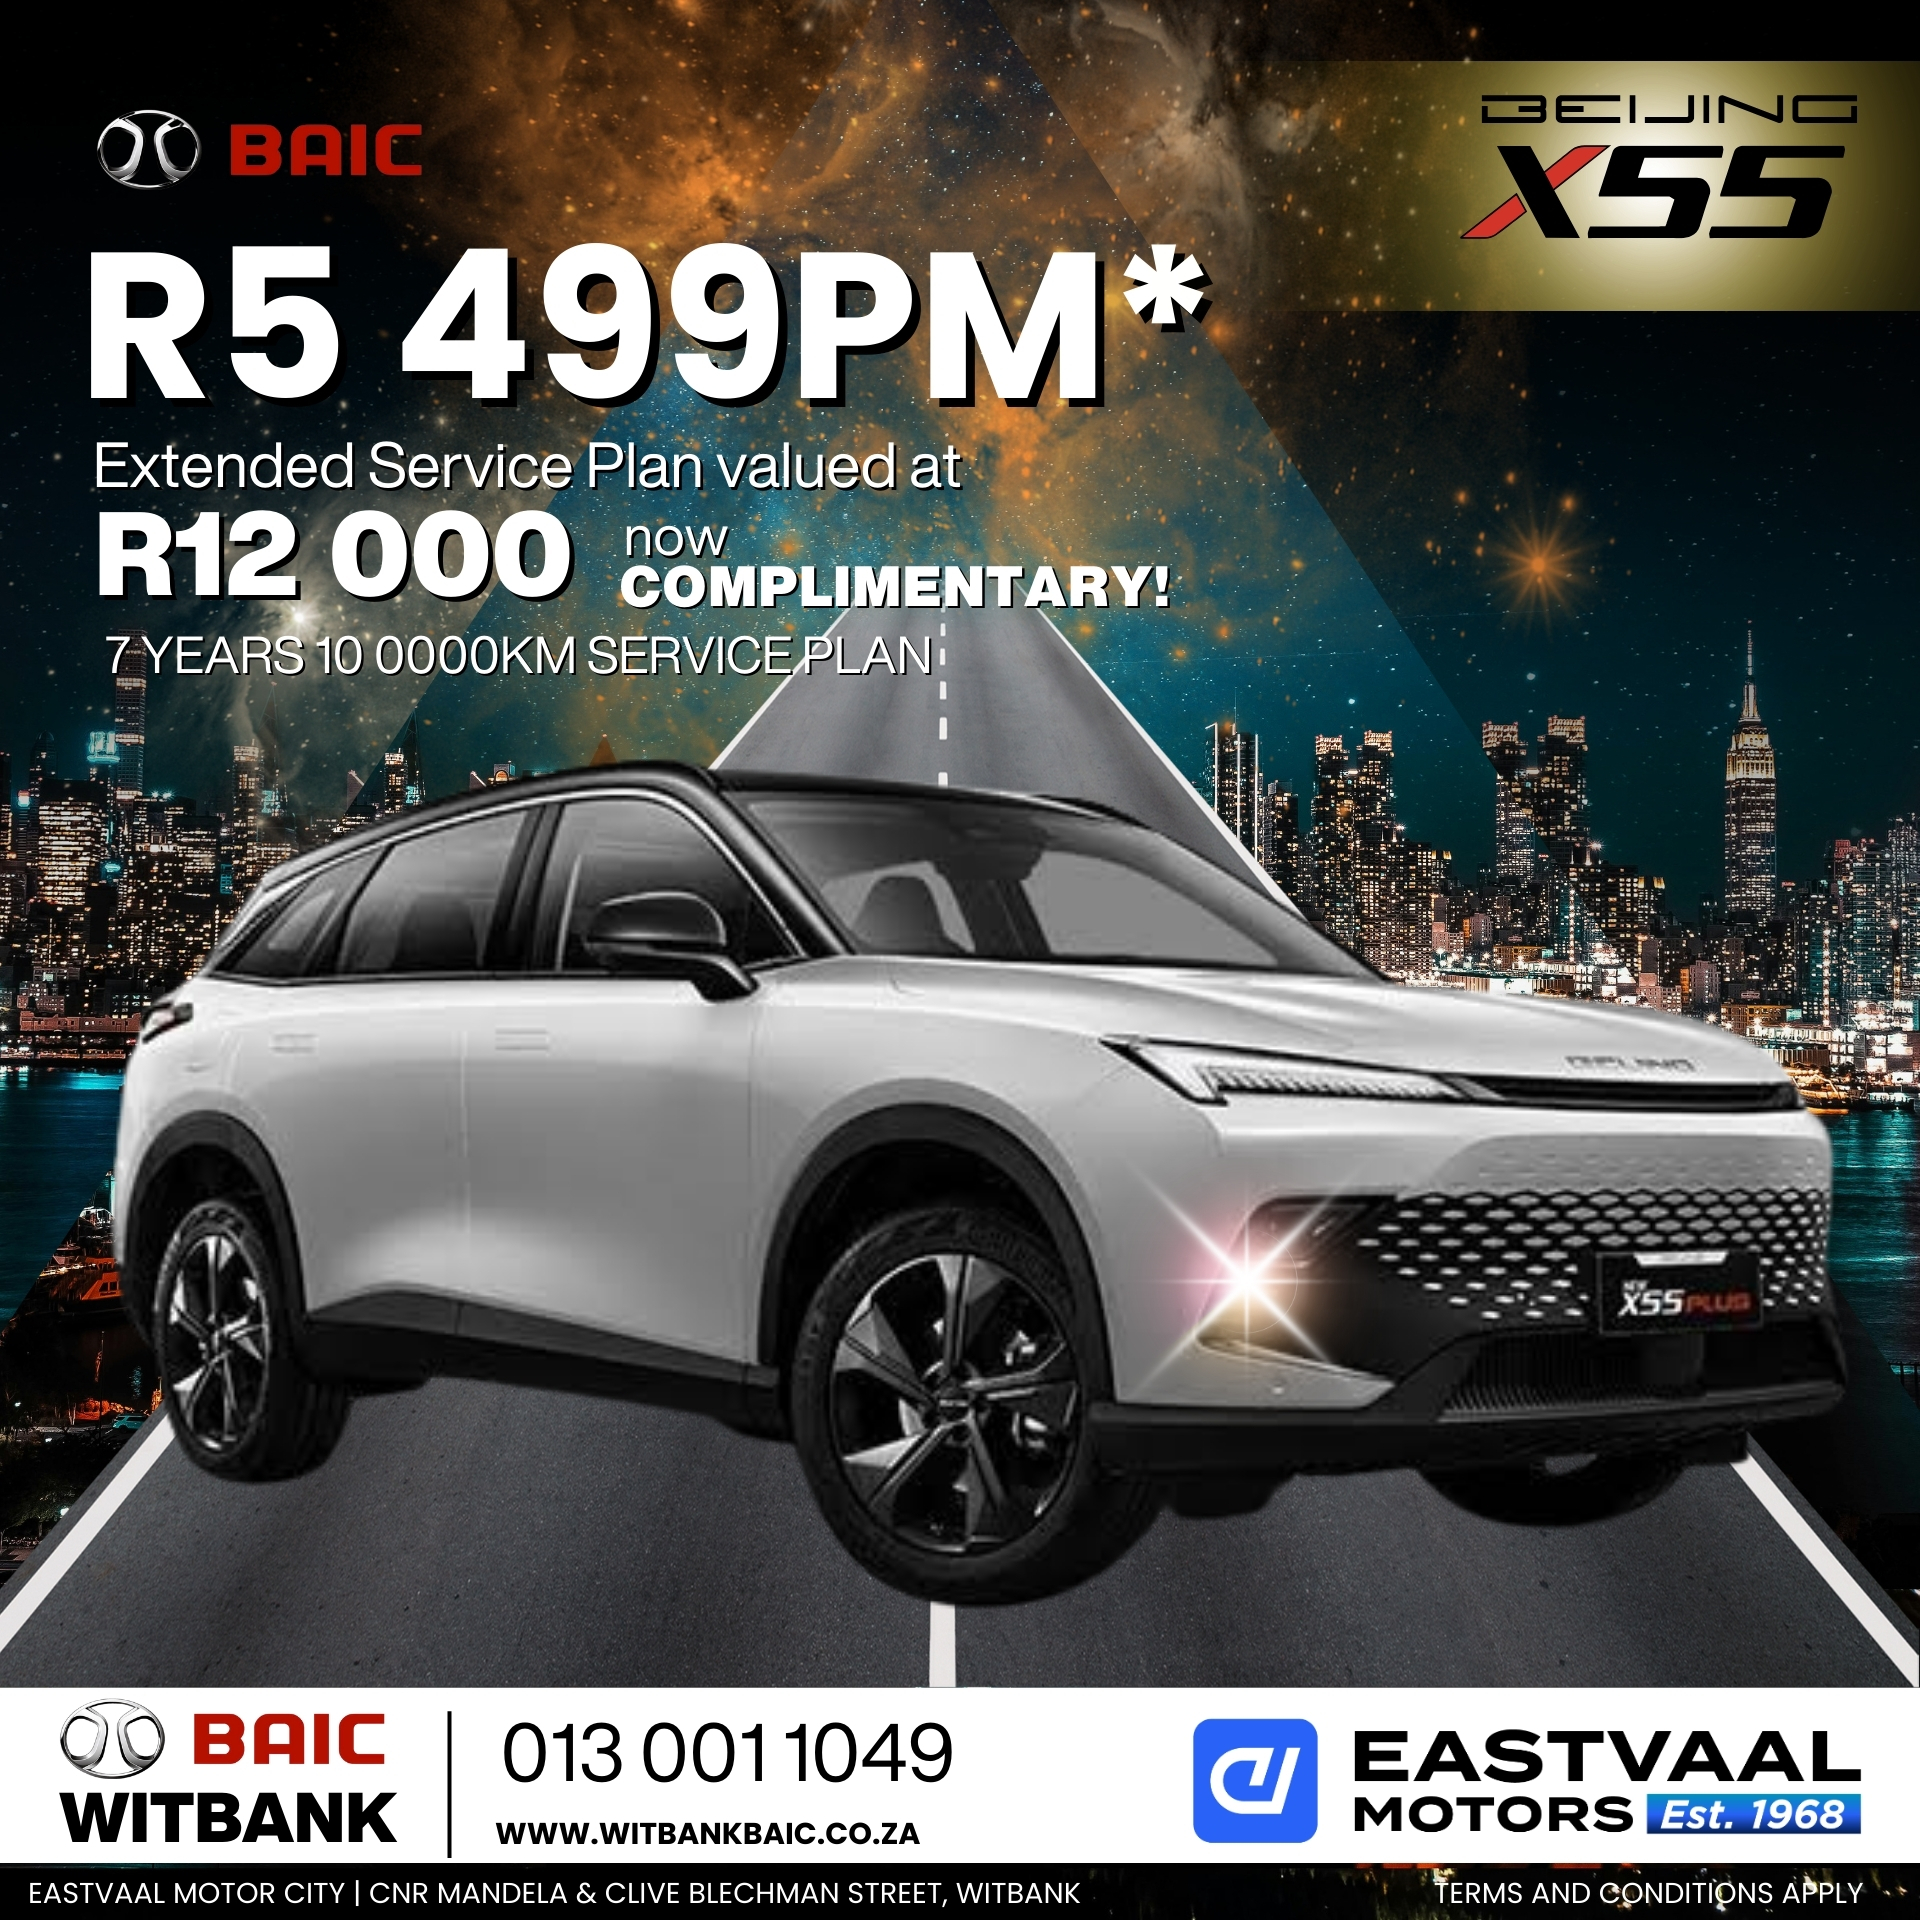 Drive into July with unbeatable deals on BAIC! Visit Eastvaal Motor City and discover your new ride. image from 